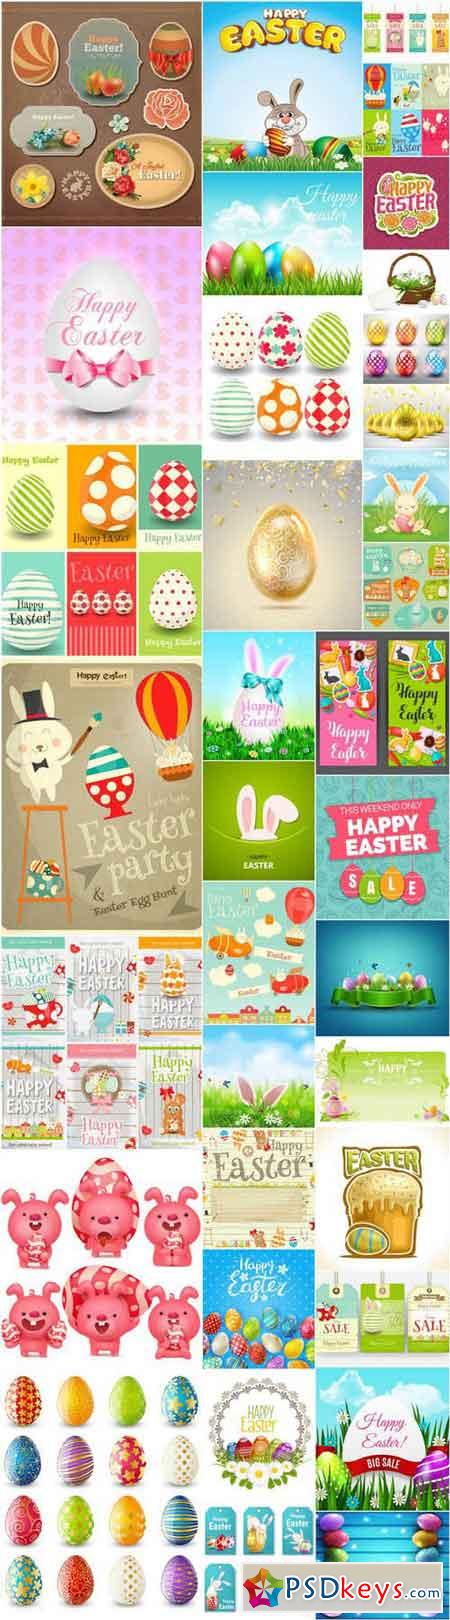 Happy Easter Easter Eggs Collection #3 - 35 Vector